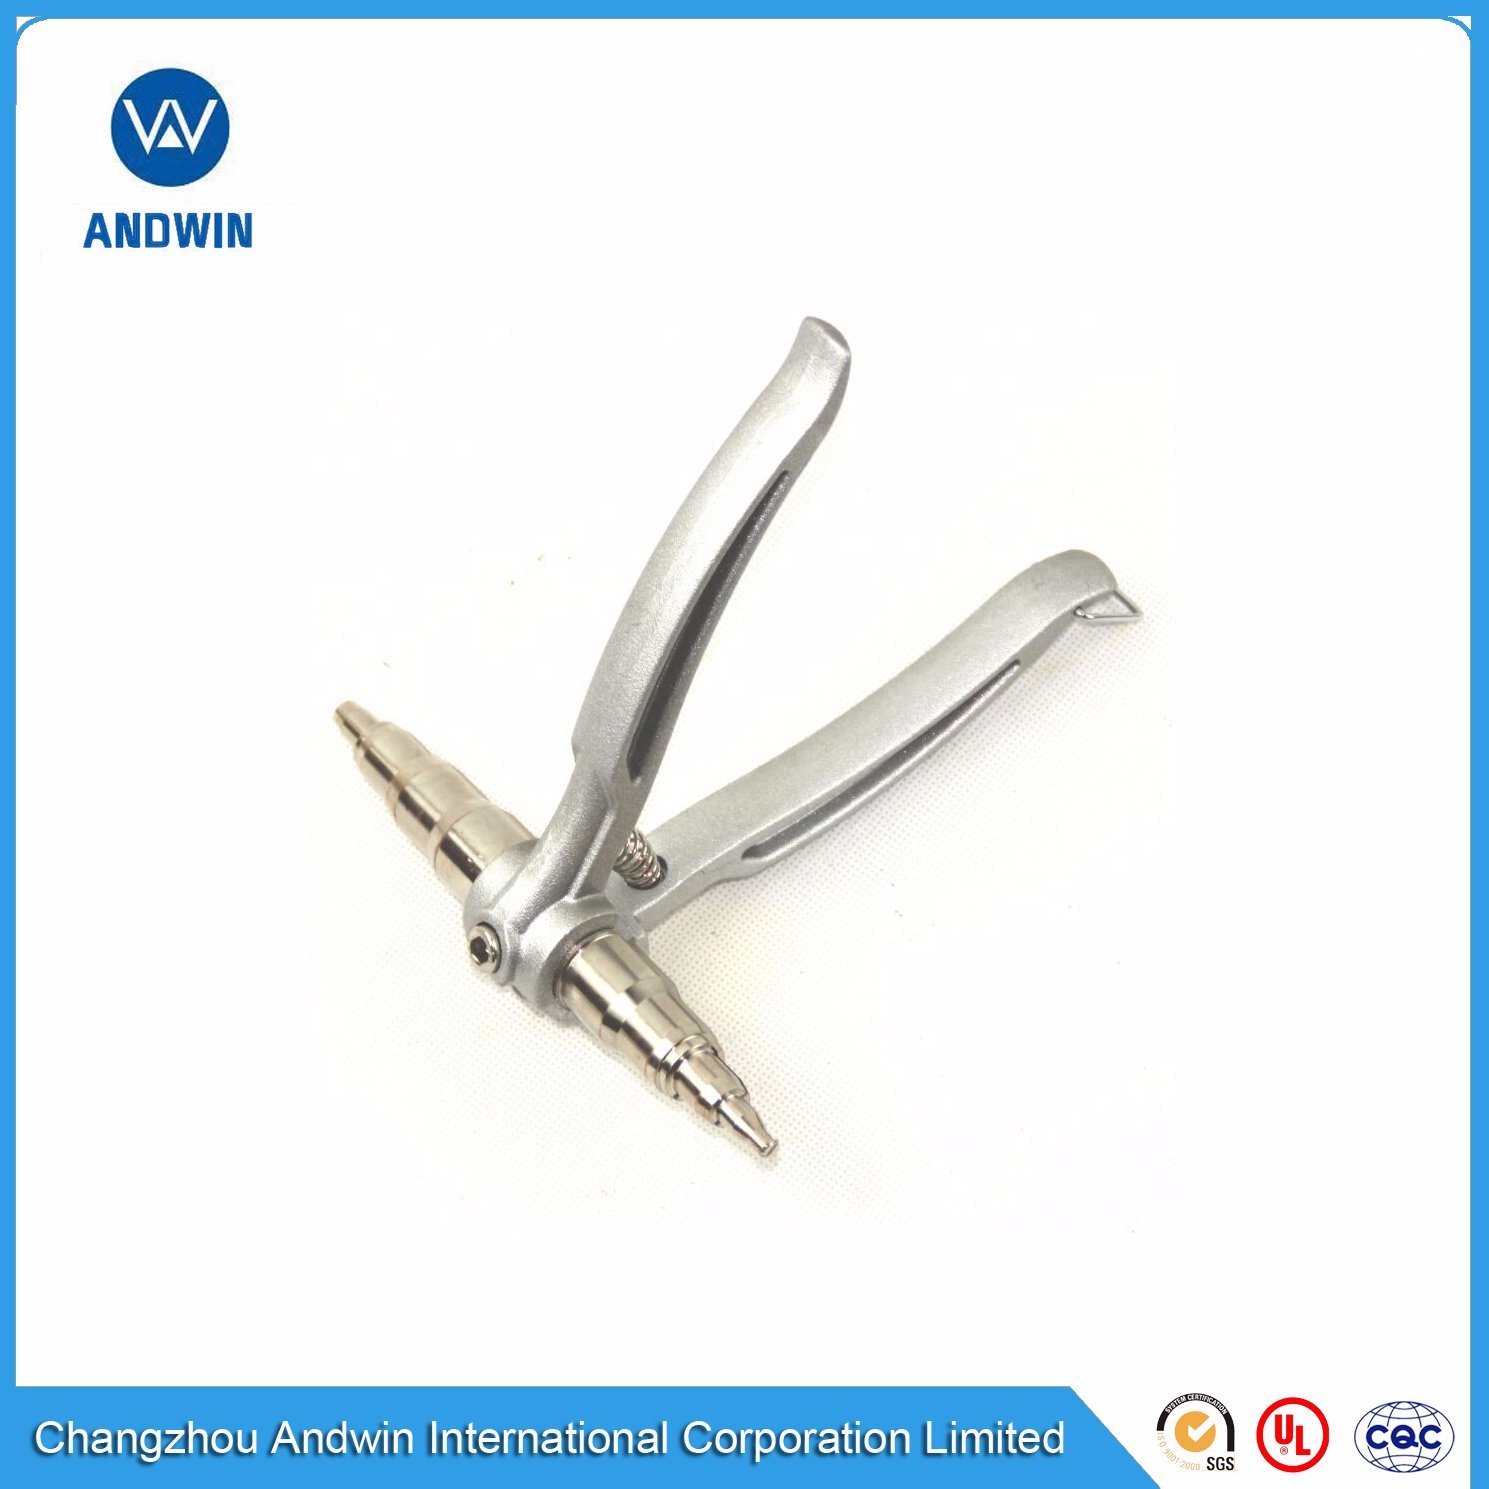 Refrigeration Part Hand Swaging Tools CT-23